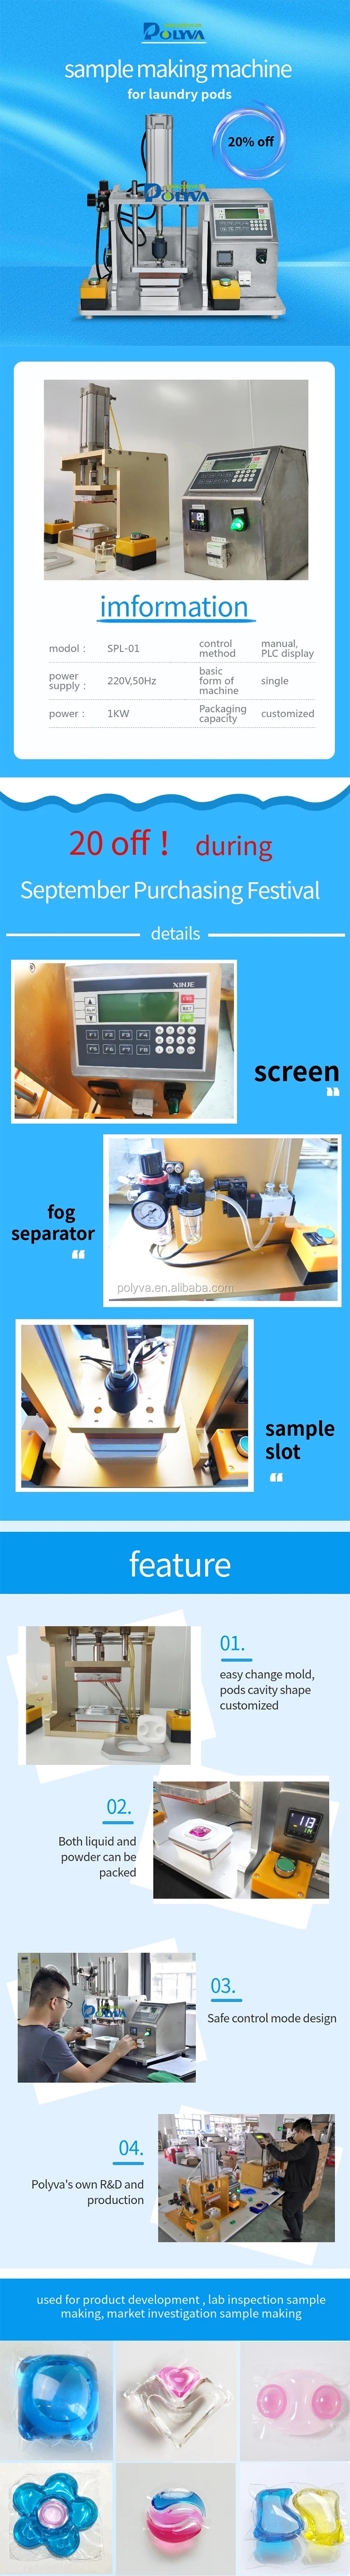 low-cost sample & inspection machine made in china for factory-4